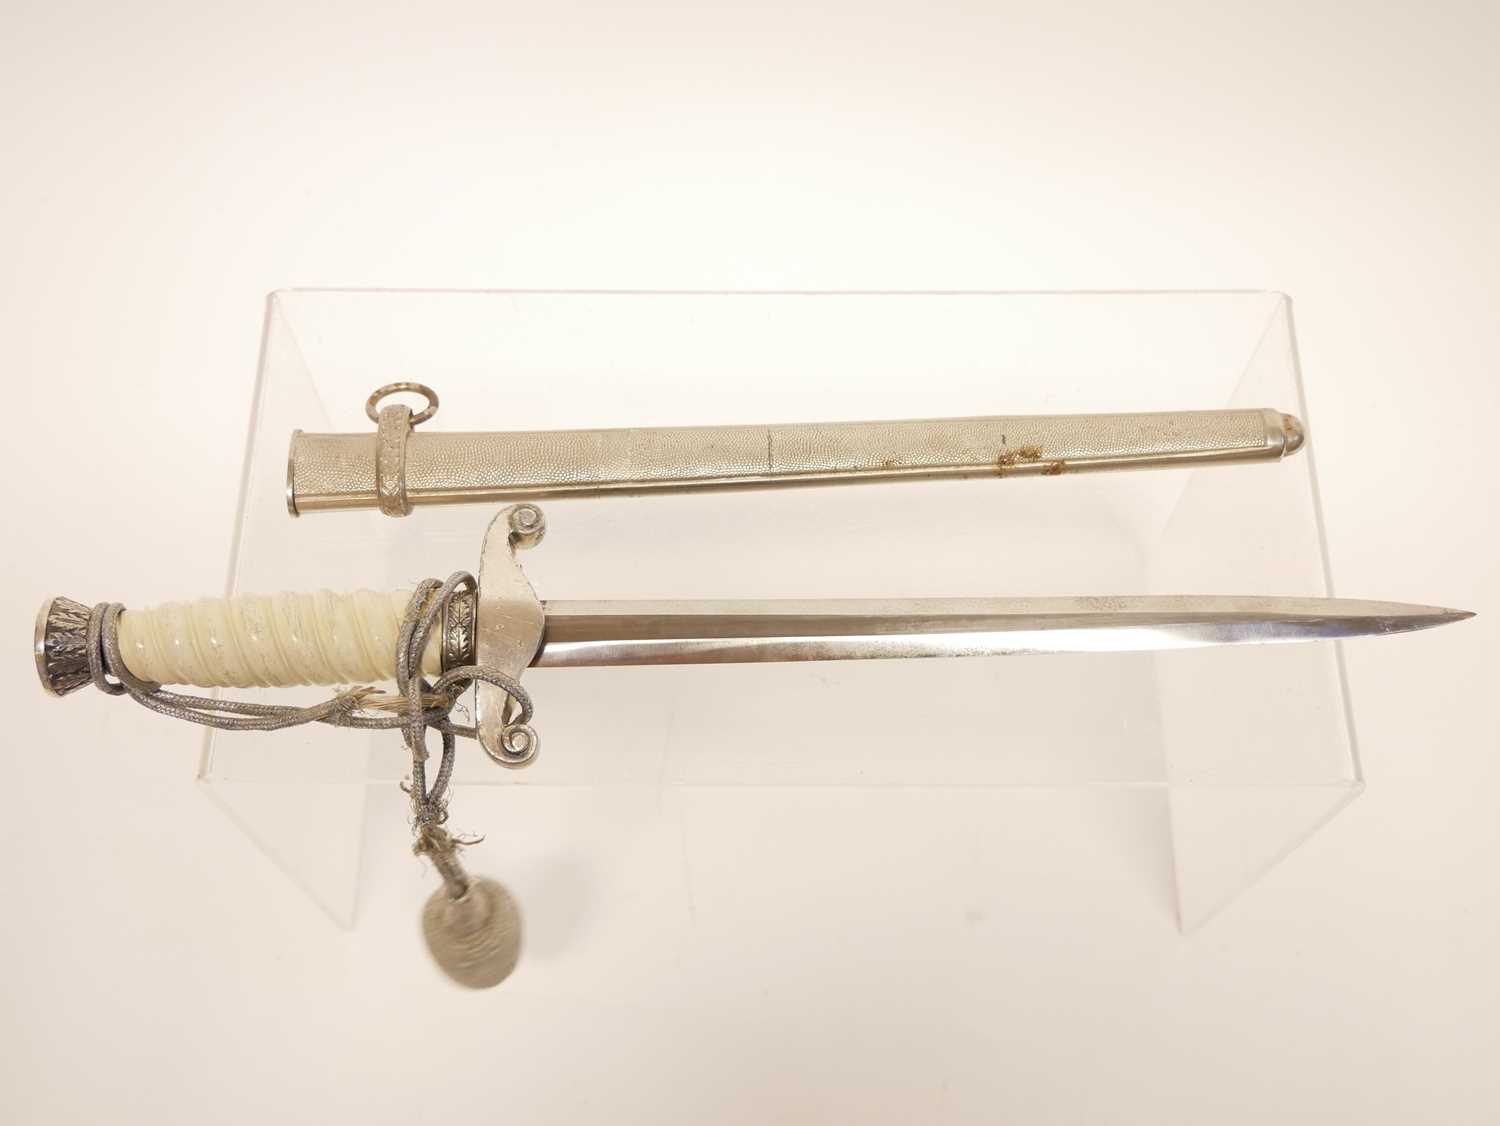 German Third Reich Wehrmacht Officer’s dagger, by Alex Coppel (Alcoso) Solingen, with scabbard and - Image 7 of 11